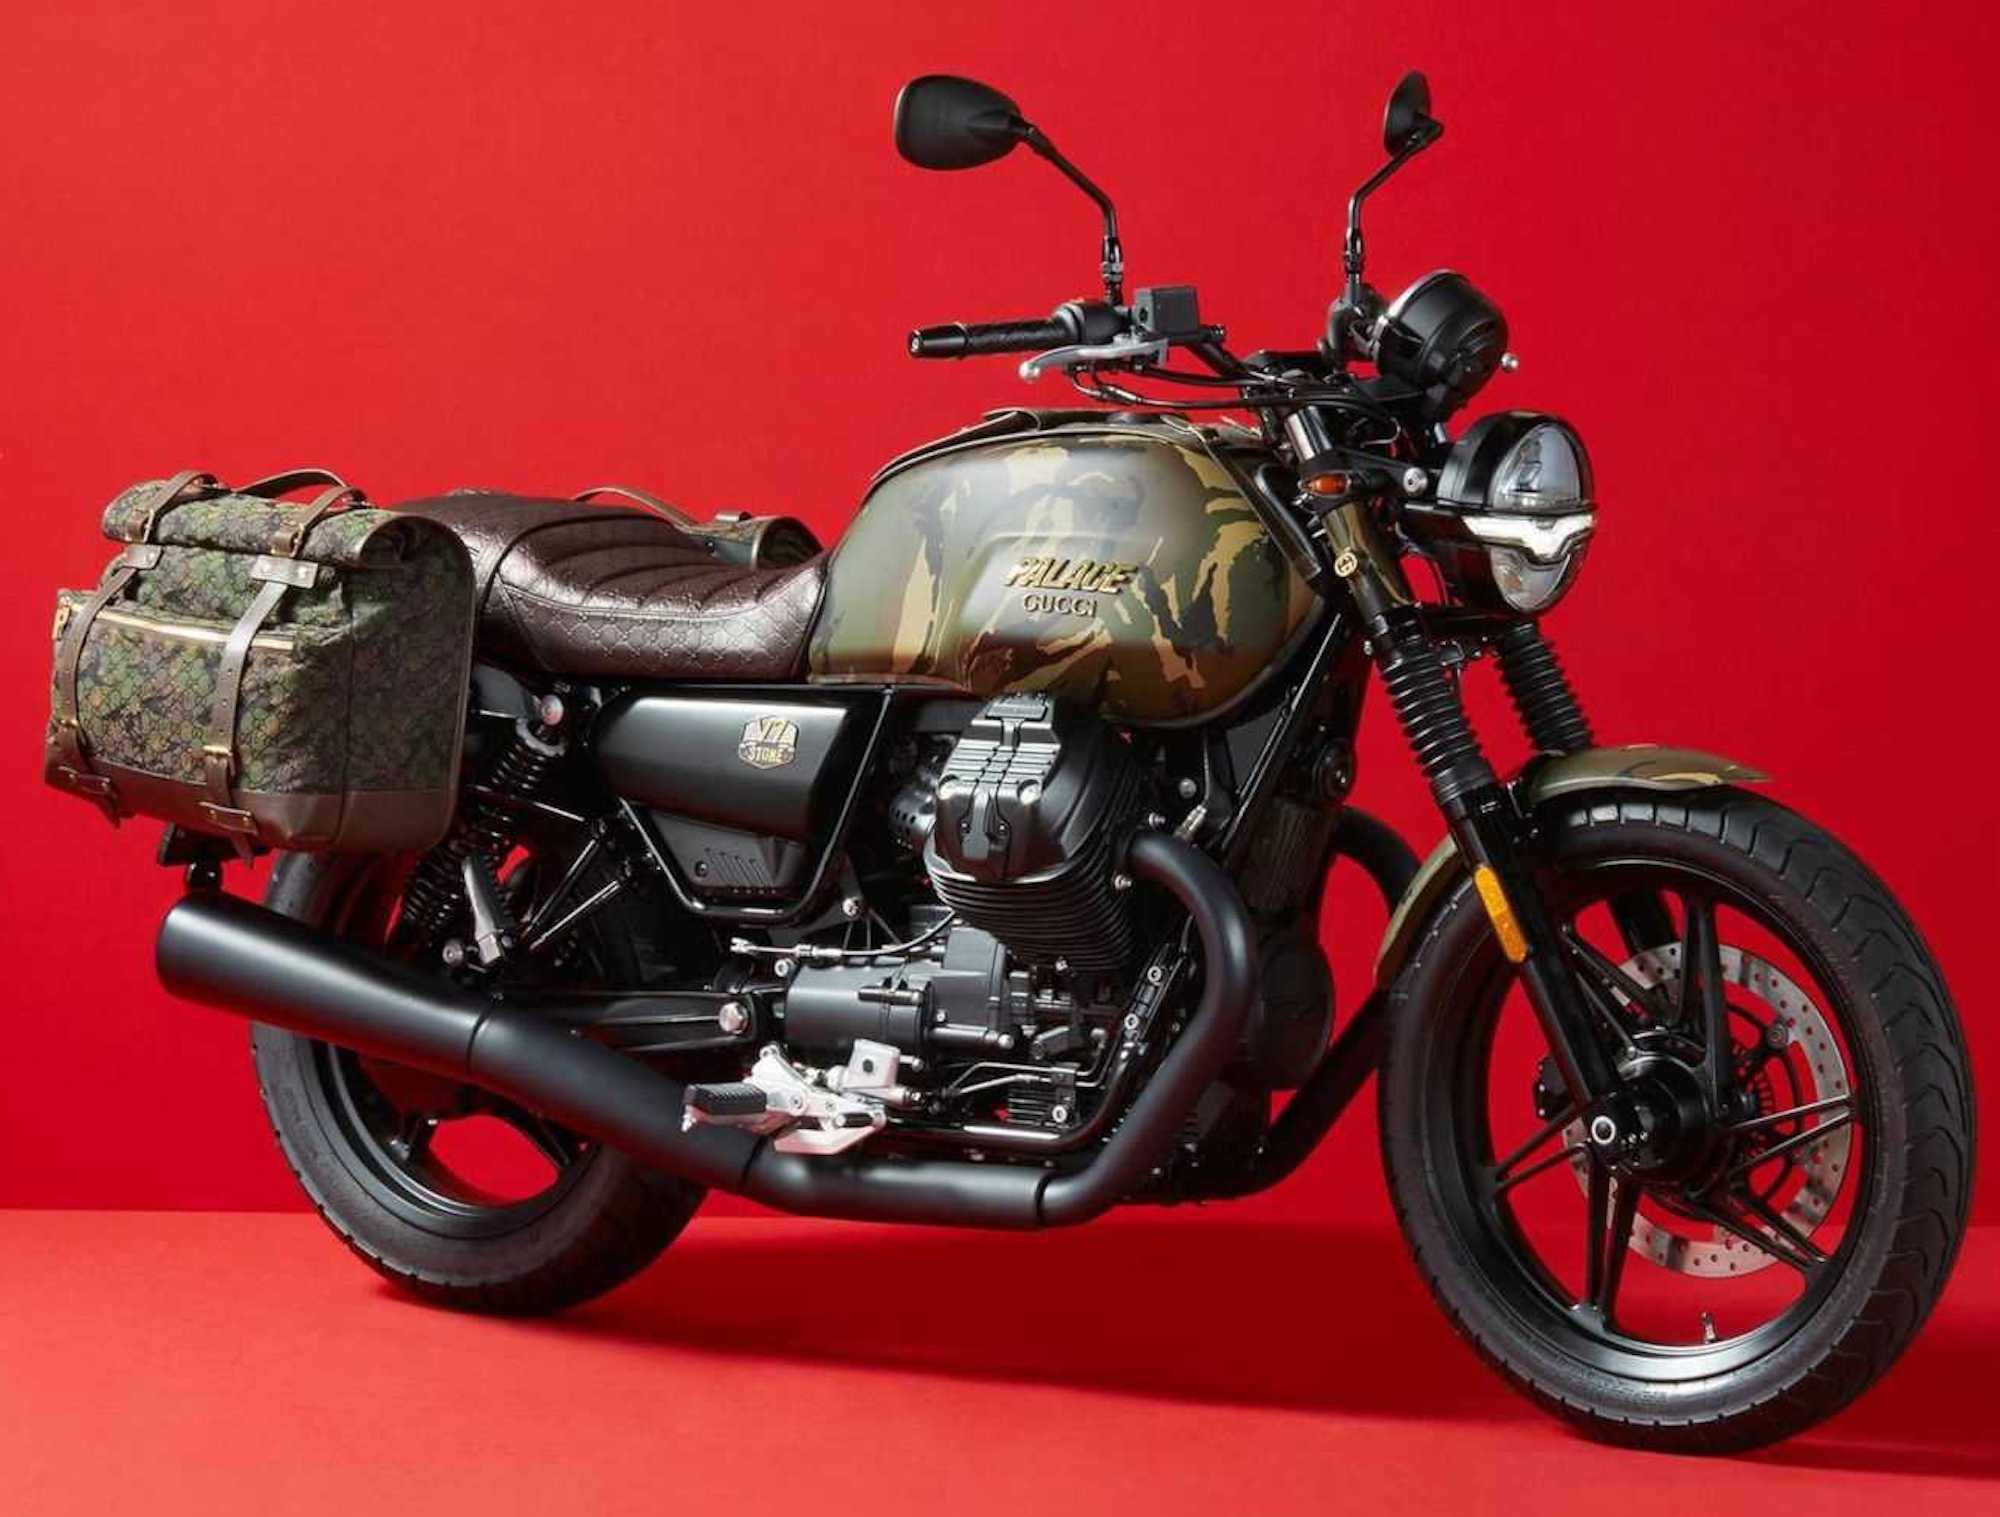 The Palace Gucci Moto Guzzi V7 Stone Limited Edition, created in collaboration with Gucci and Palace Skateboards. Media sourced from RideApart.